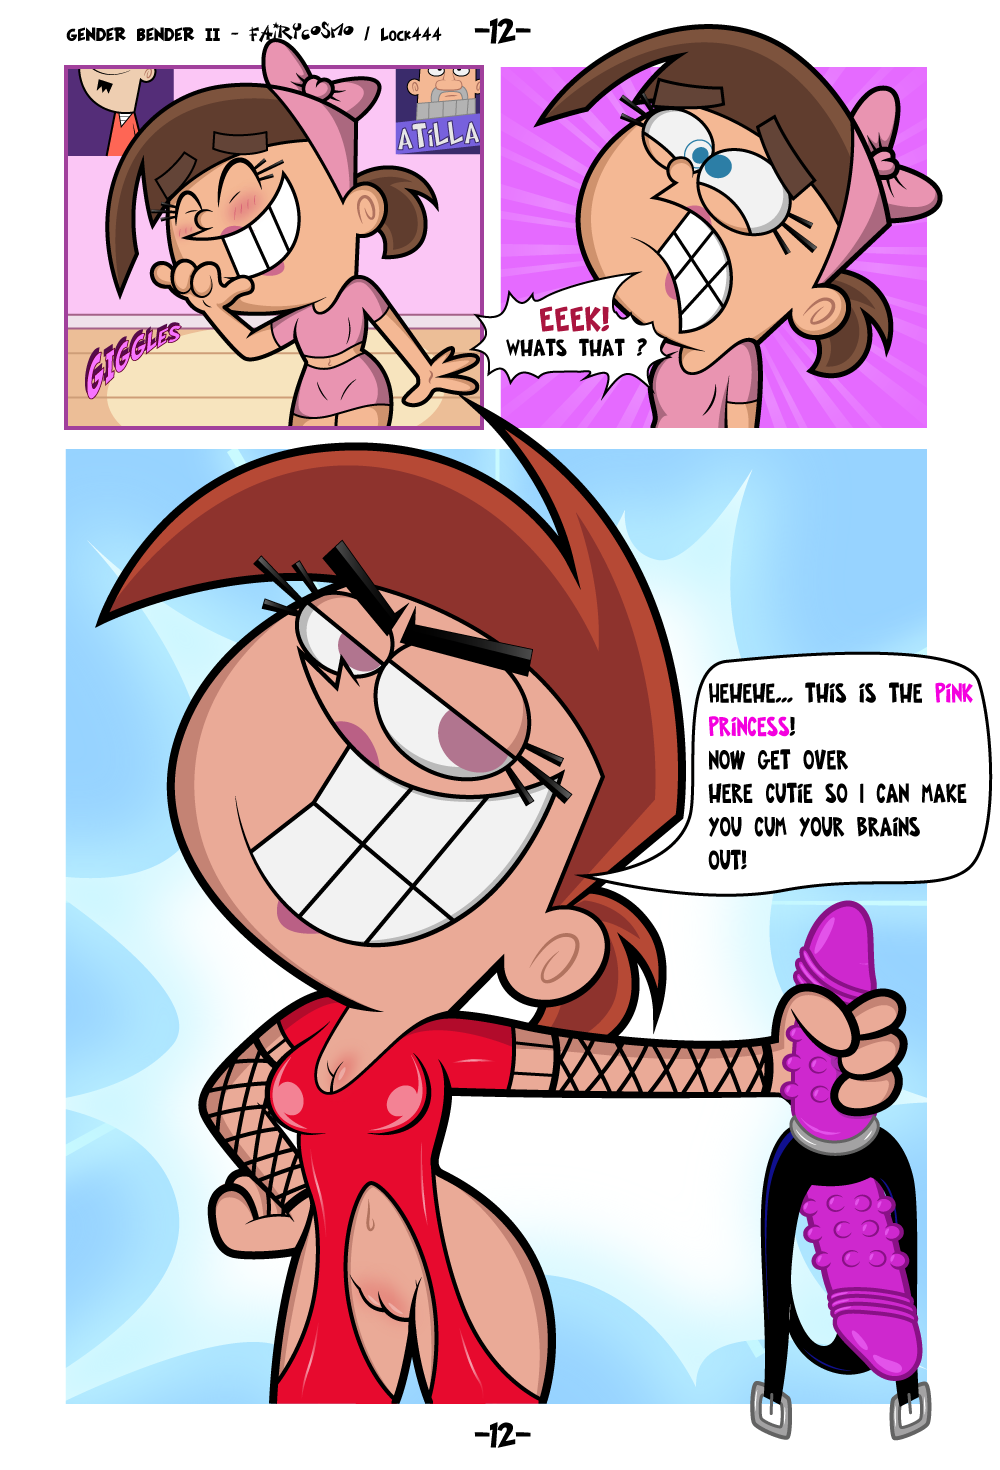 Fairly Oddparents Body Swap Porn - gender bender the art of fairycosmo 6 - MegaPornX